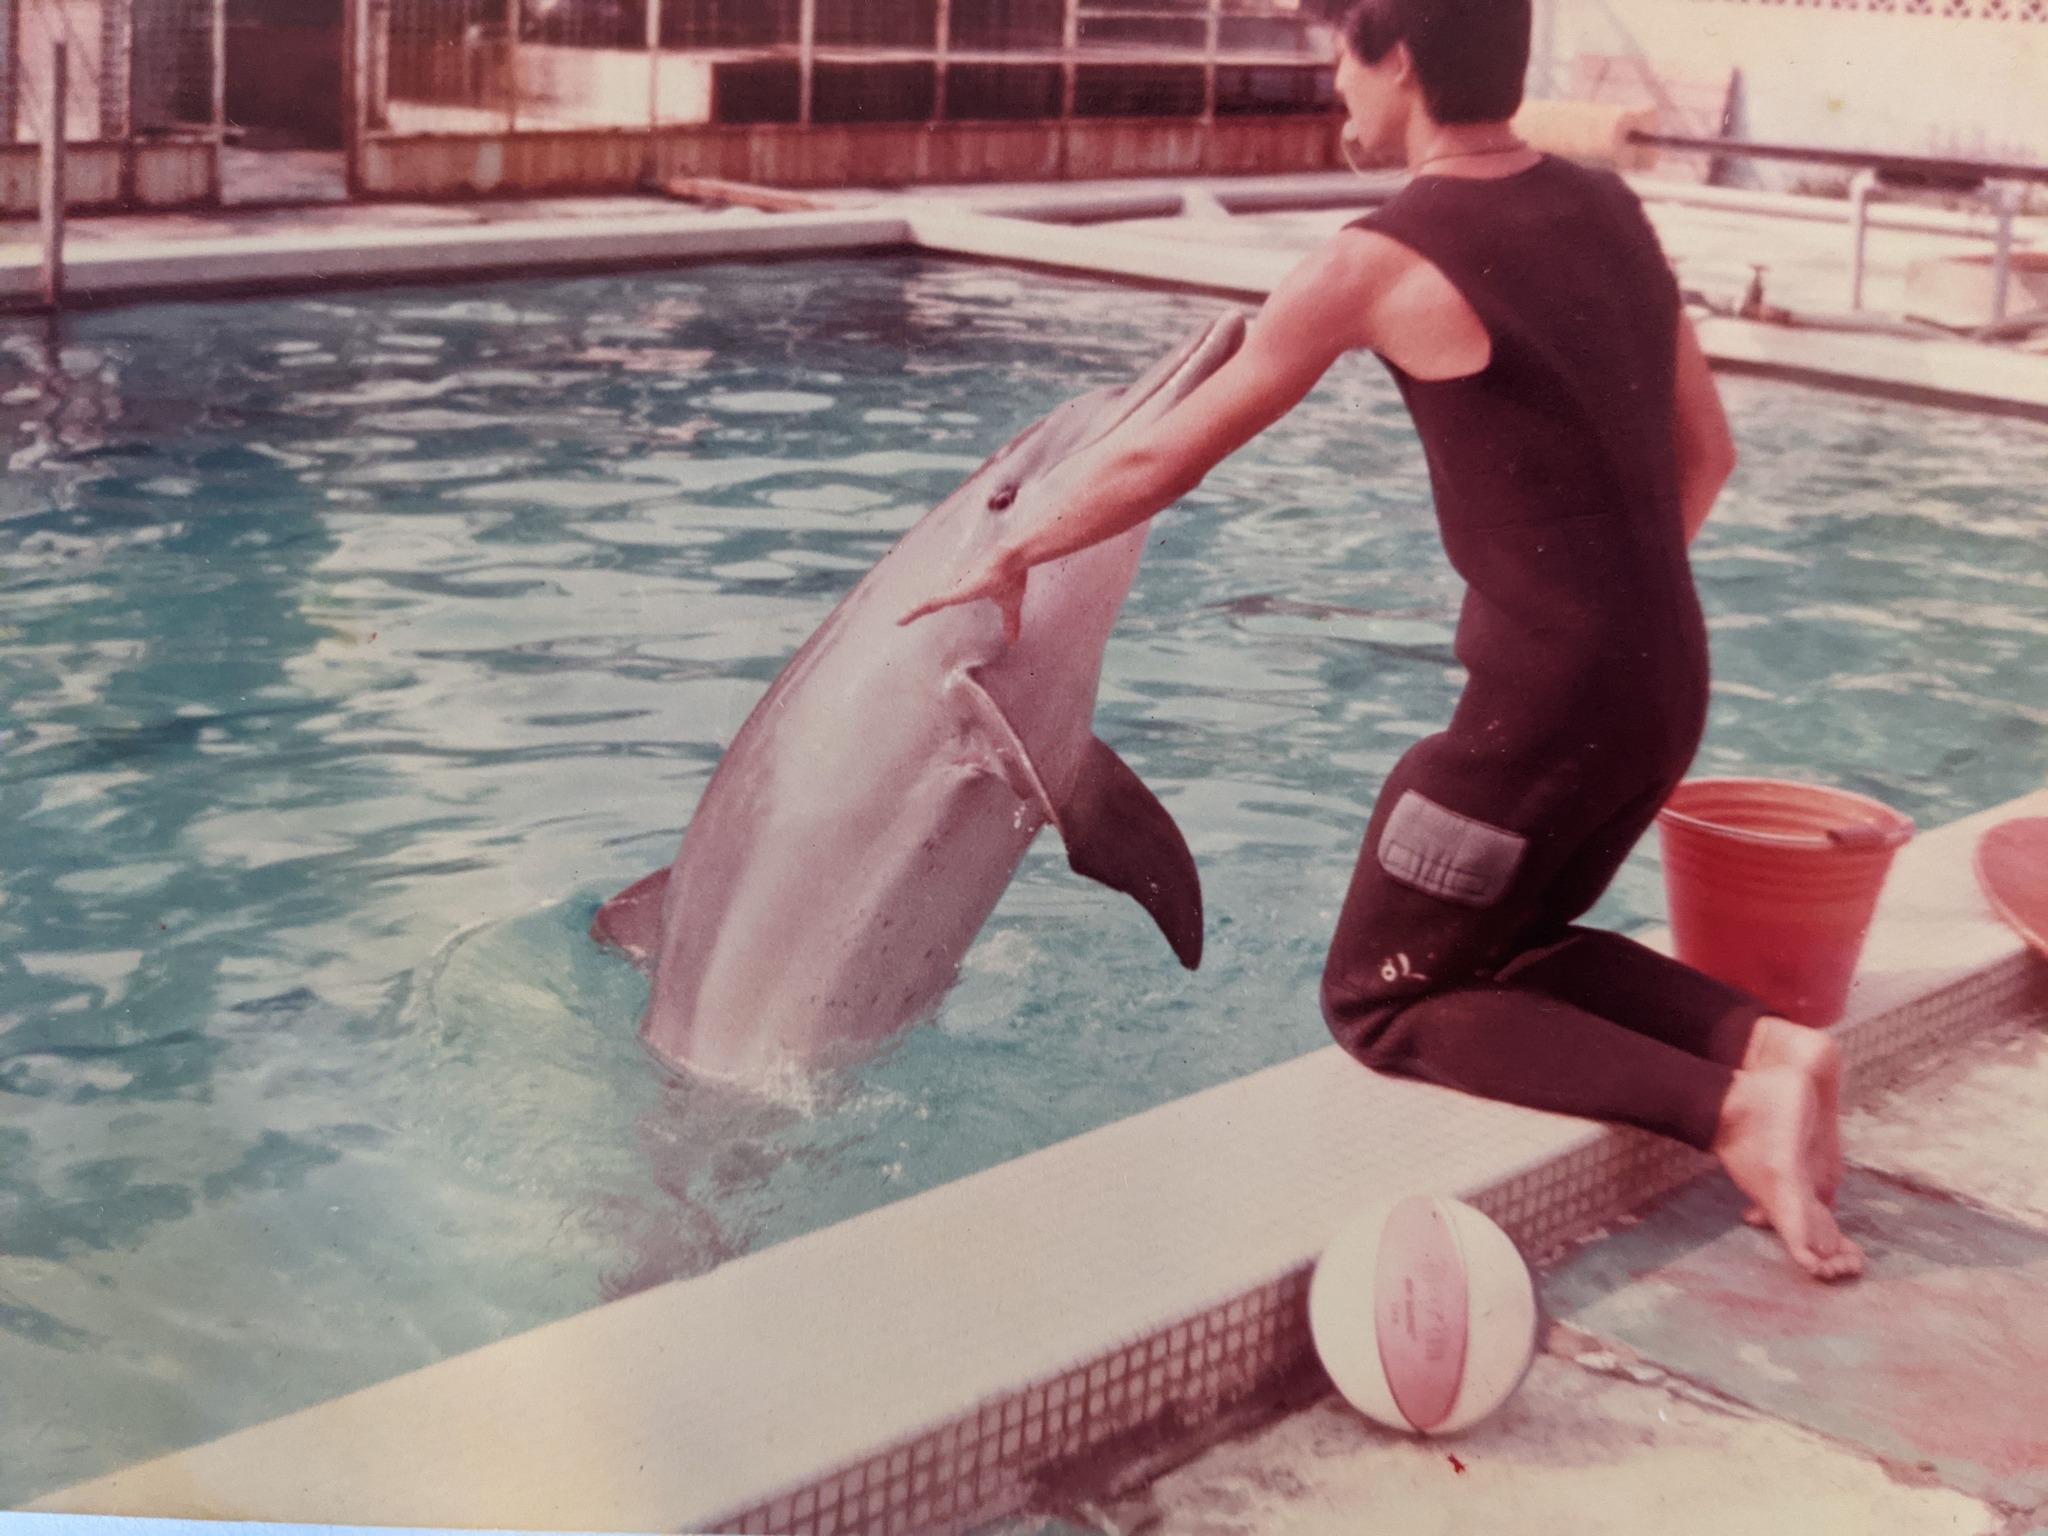 Lim worked as a dolphin trainer in Malaysia